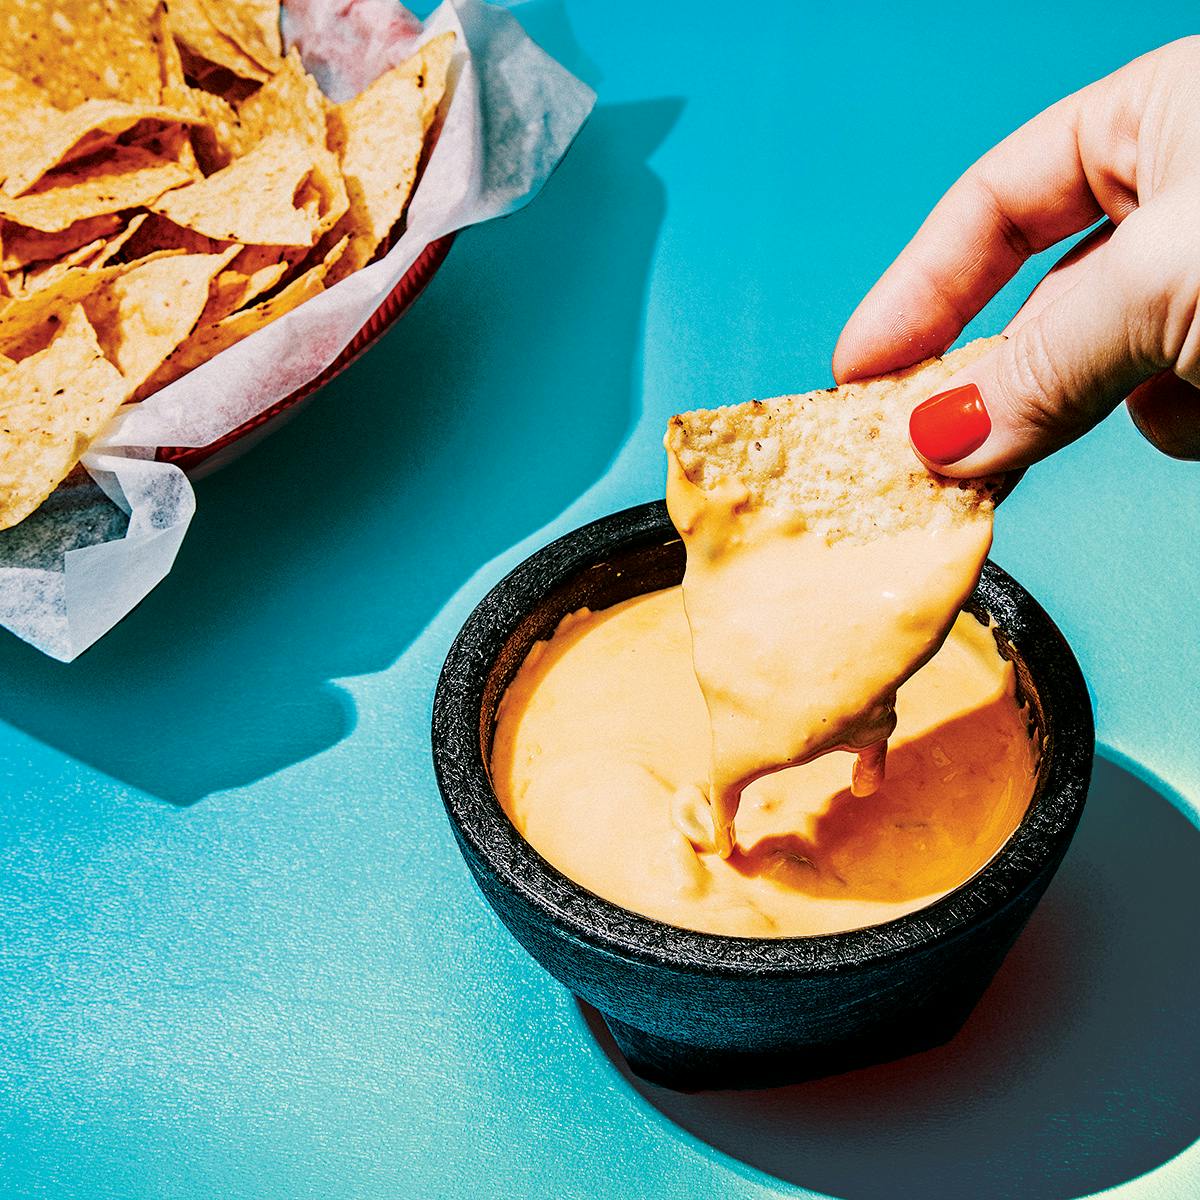 https://img.texasmonthly.com/2019/01/tex-mex-queso.jpg?auto=compress&crop=faces&fit=fit&fm=pjpg&ixlib=php-3.3.1&q=45